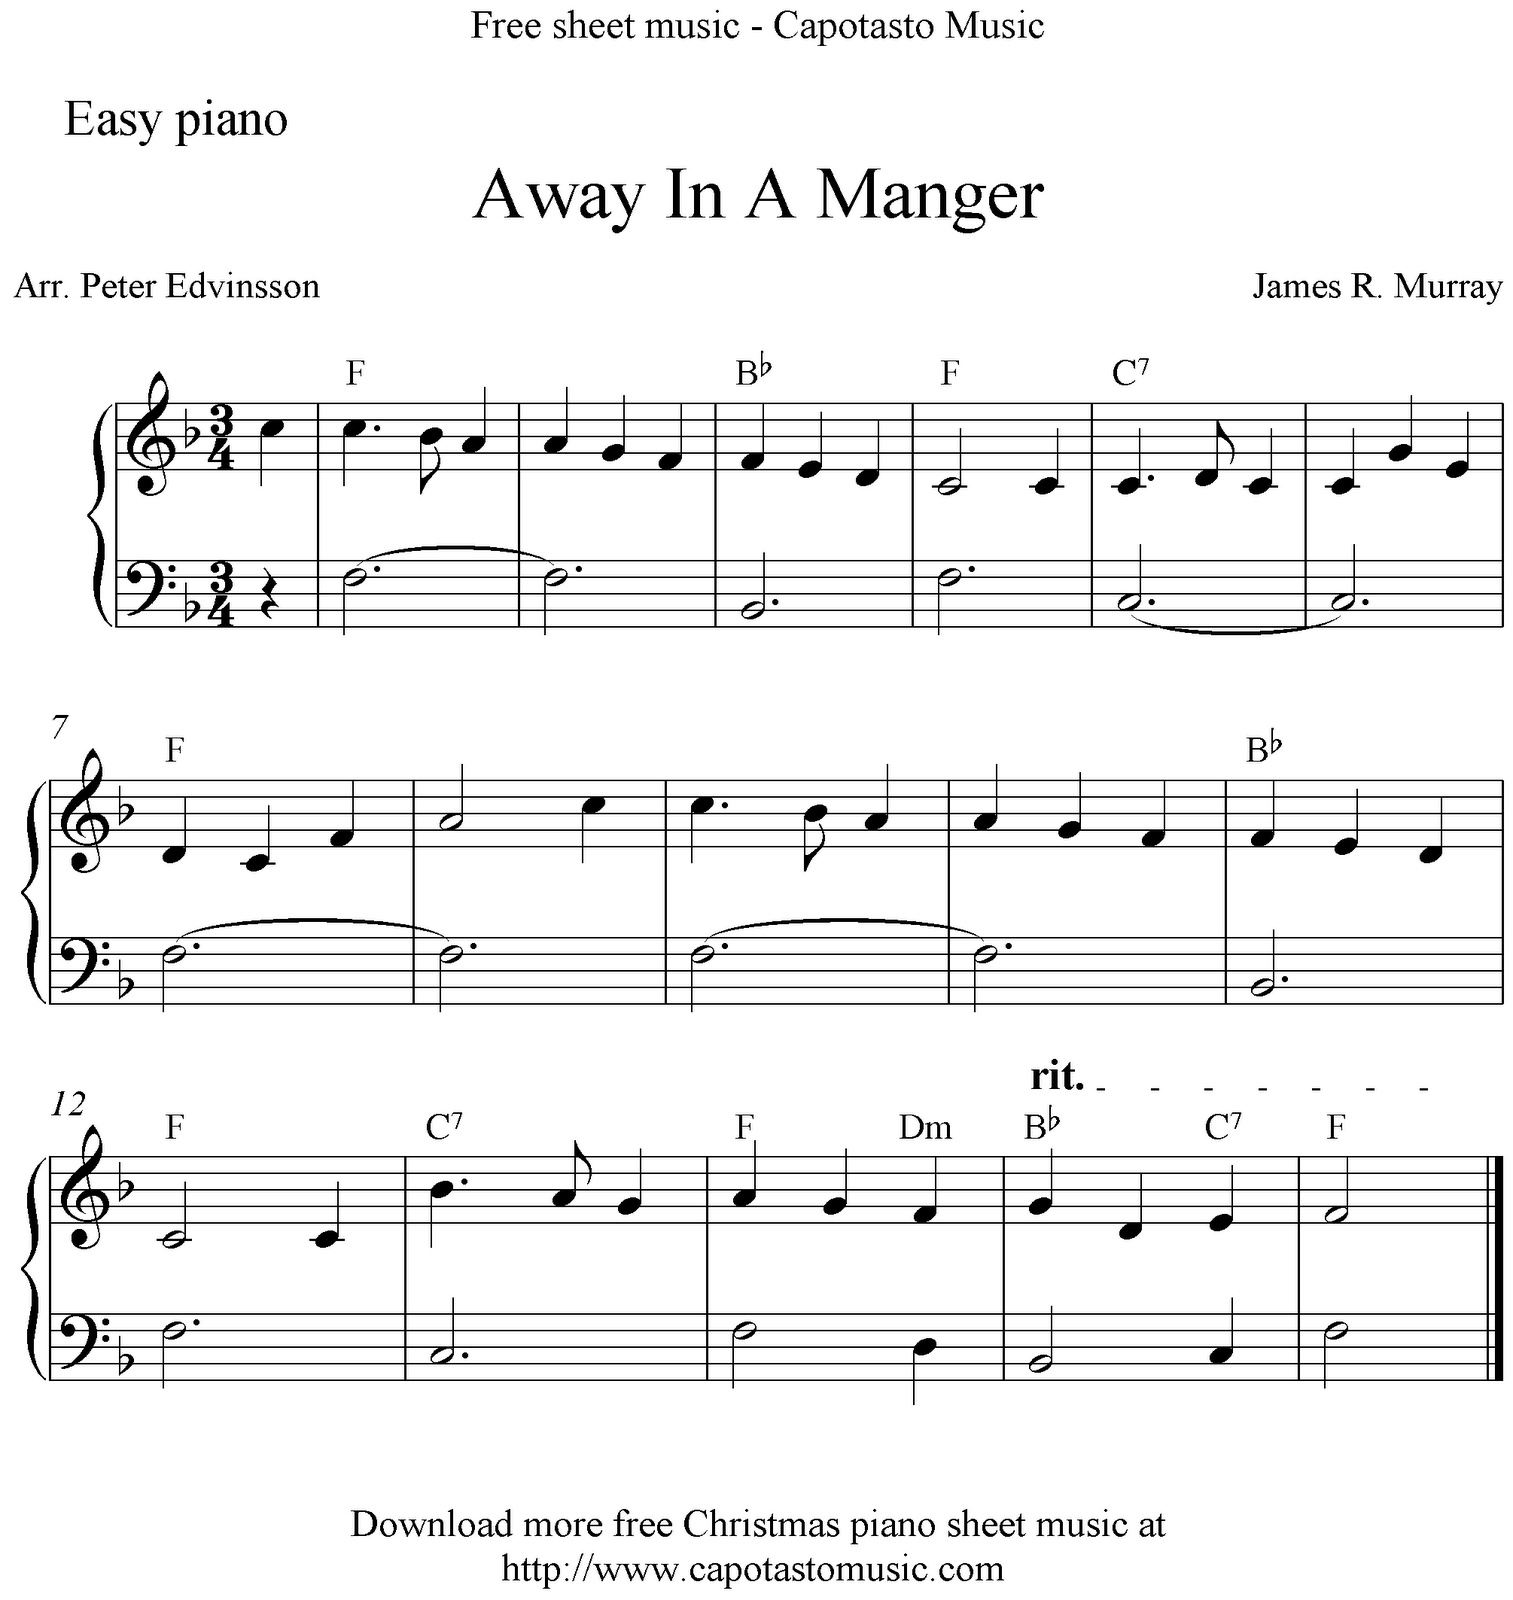 Easy Piano Arrangement By Peter Edvinsson Of The Christmas Carol Away In Manger Free Printable Christm Christmas Piano Sheet Music Sheet Music Christmas Piano - Free Christmas Piano Sheet Music For Beginners Printable